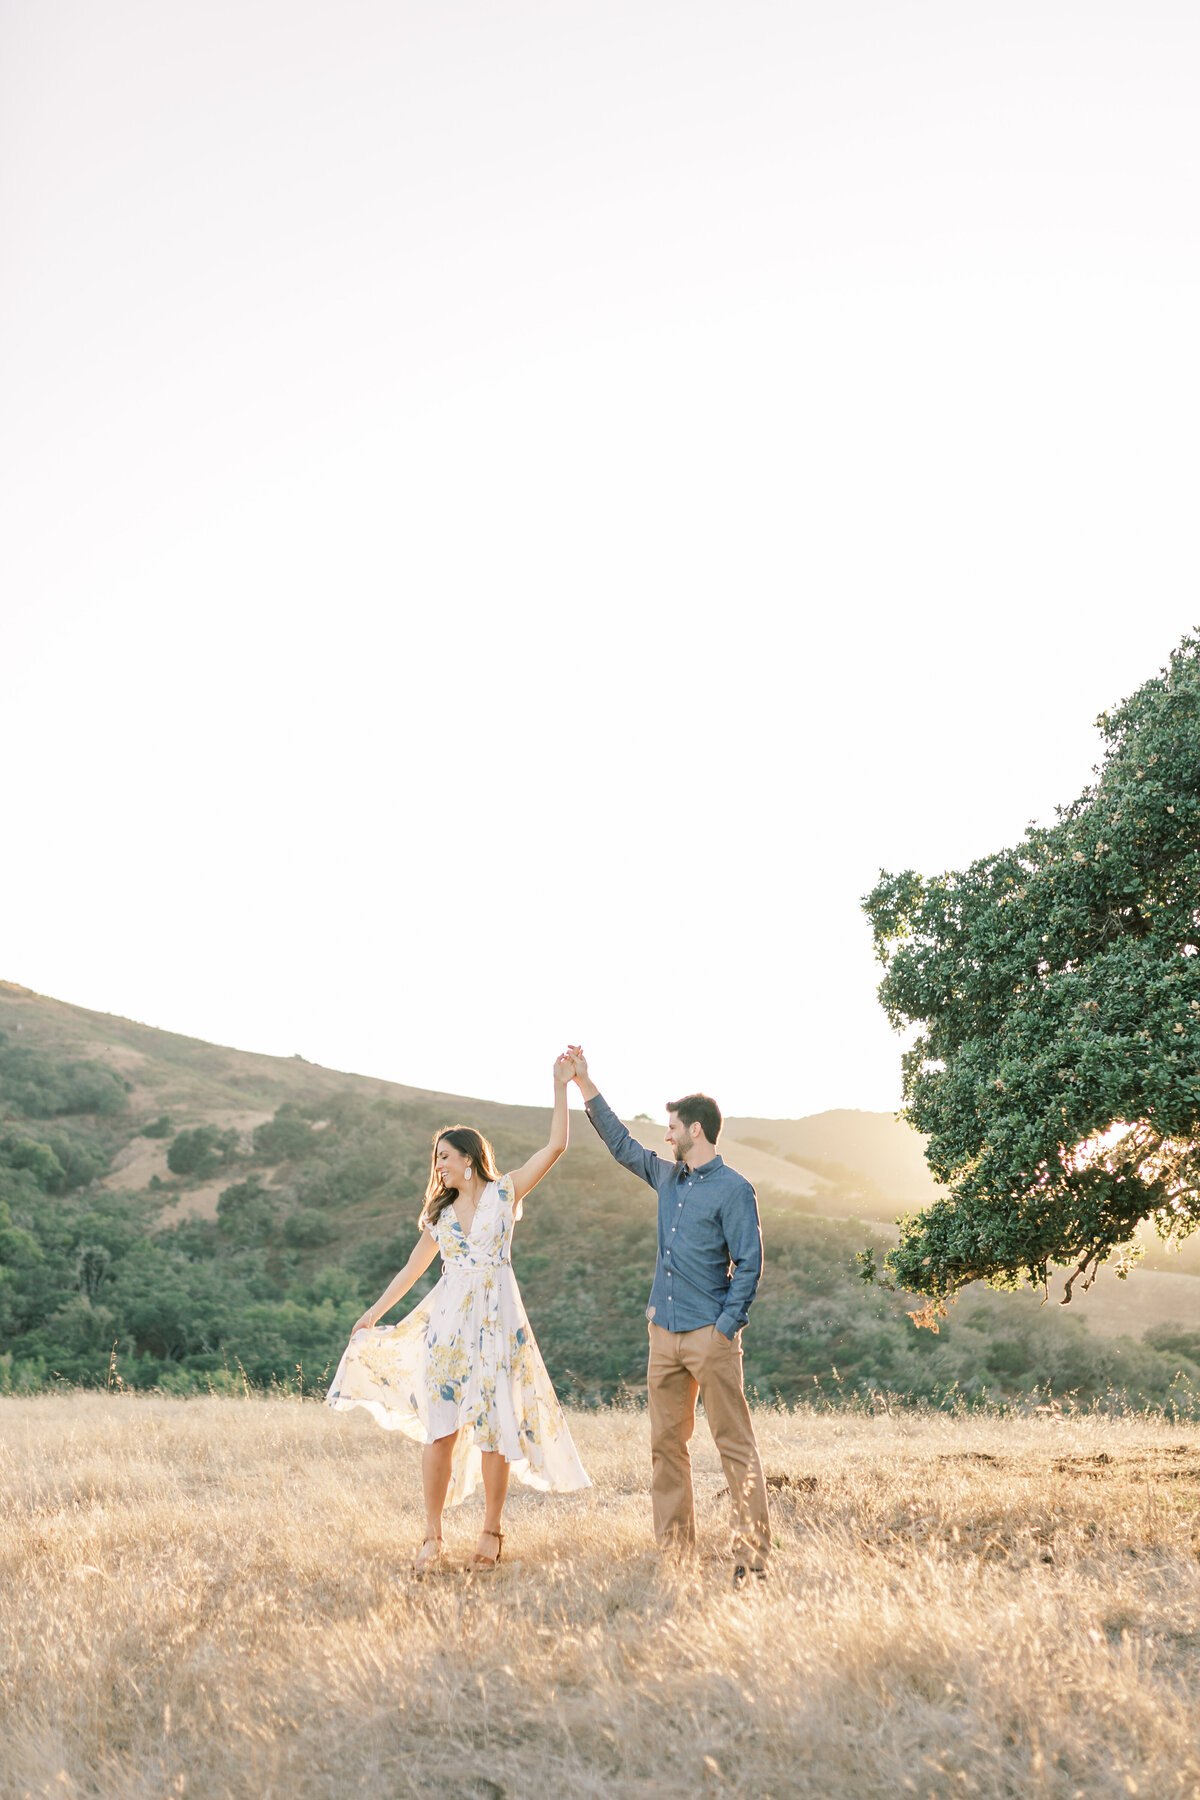 Jocelyn and Spencer Photography California Santa Barbara Wedding Engagement Luxury High End Romantic Imagery Light Airy Fineart Film Style13